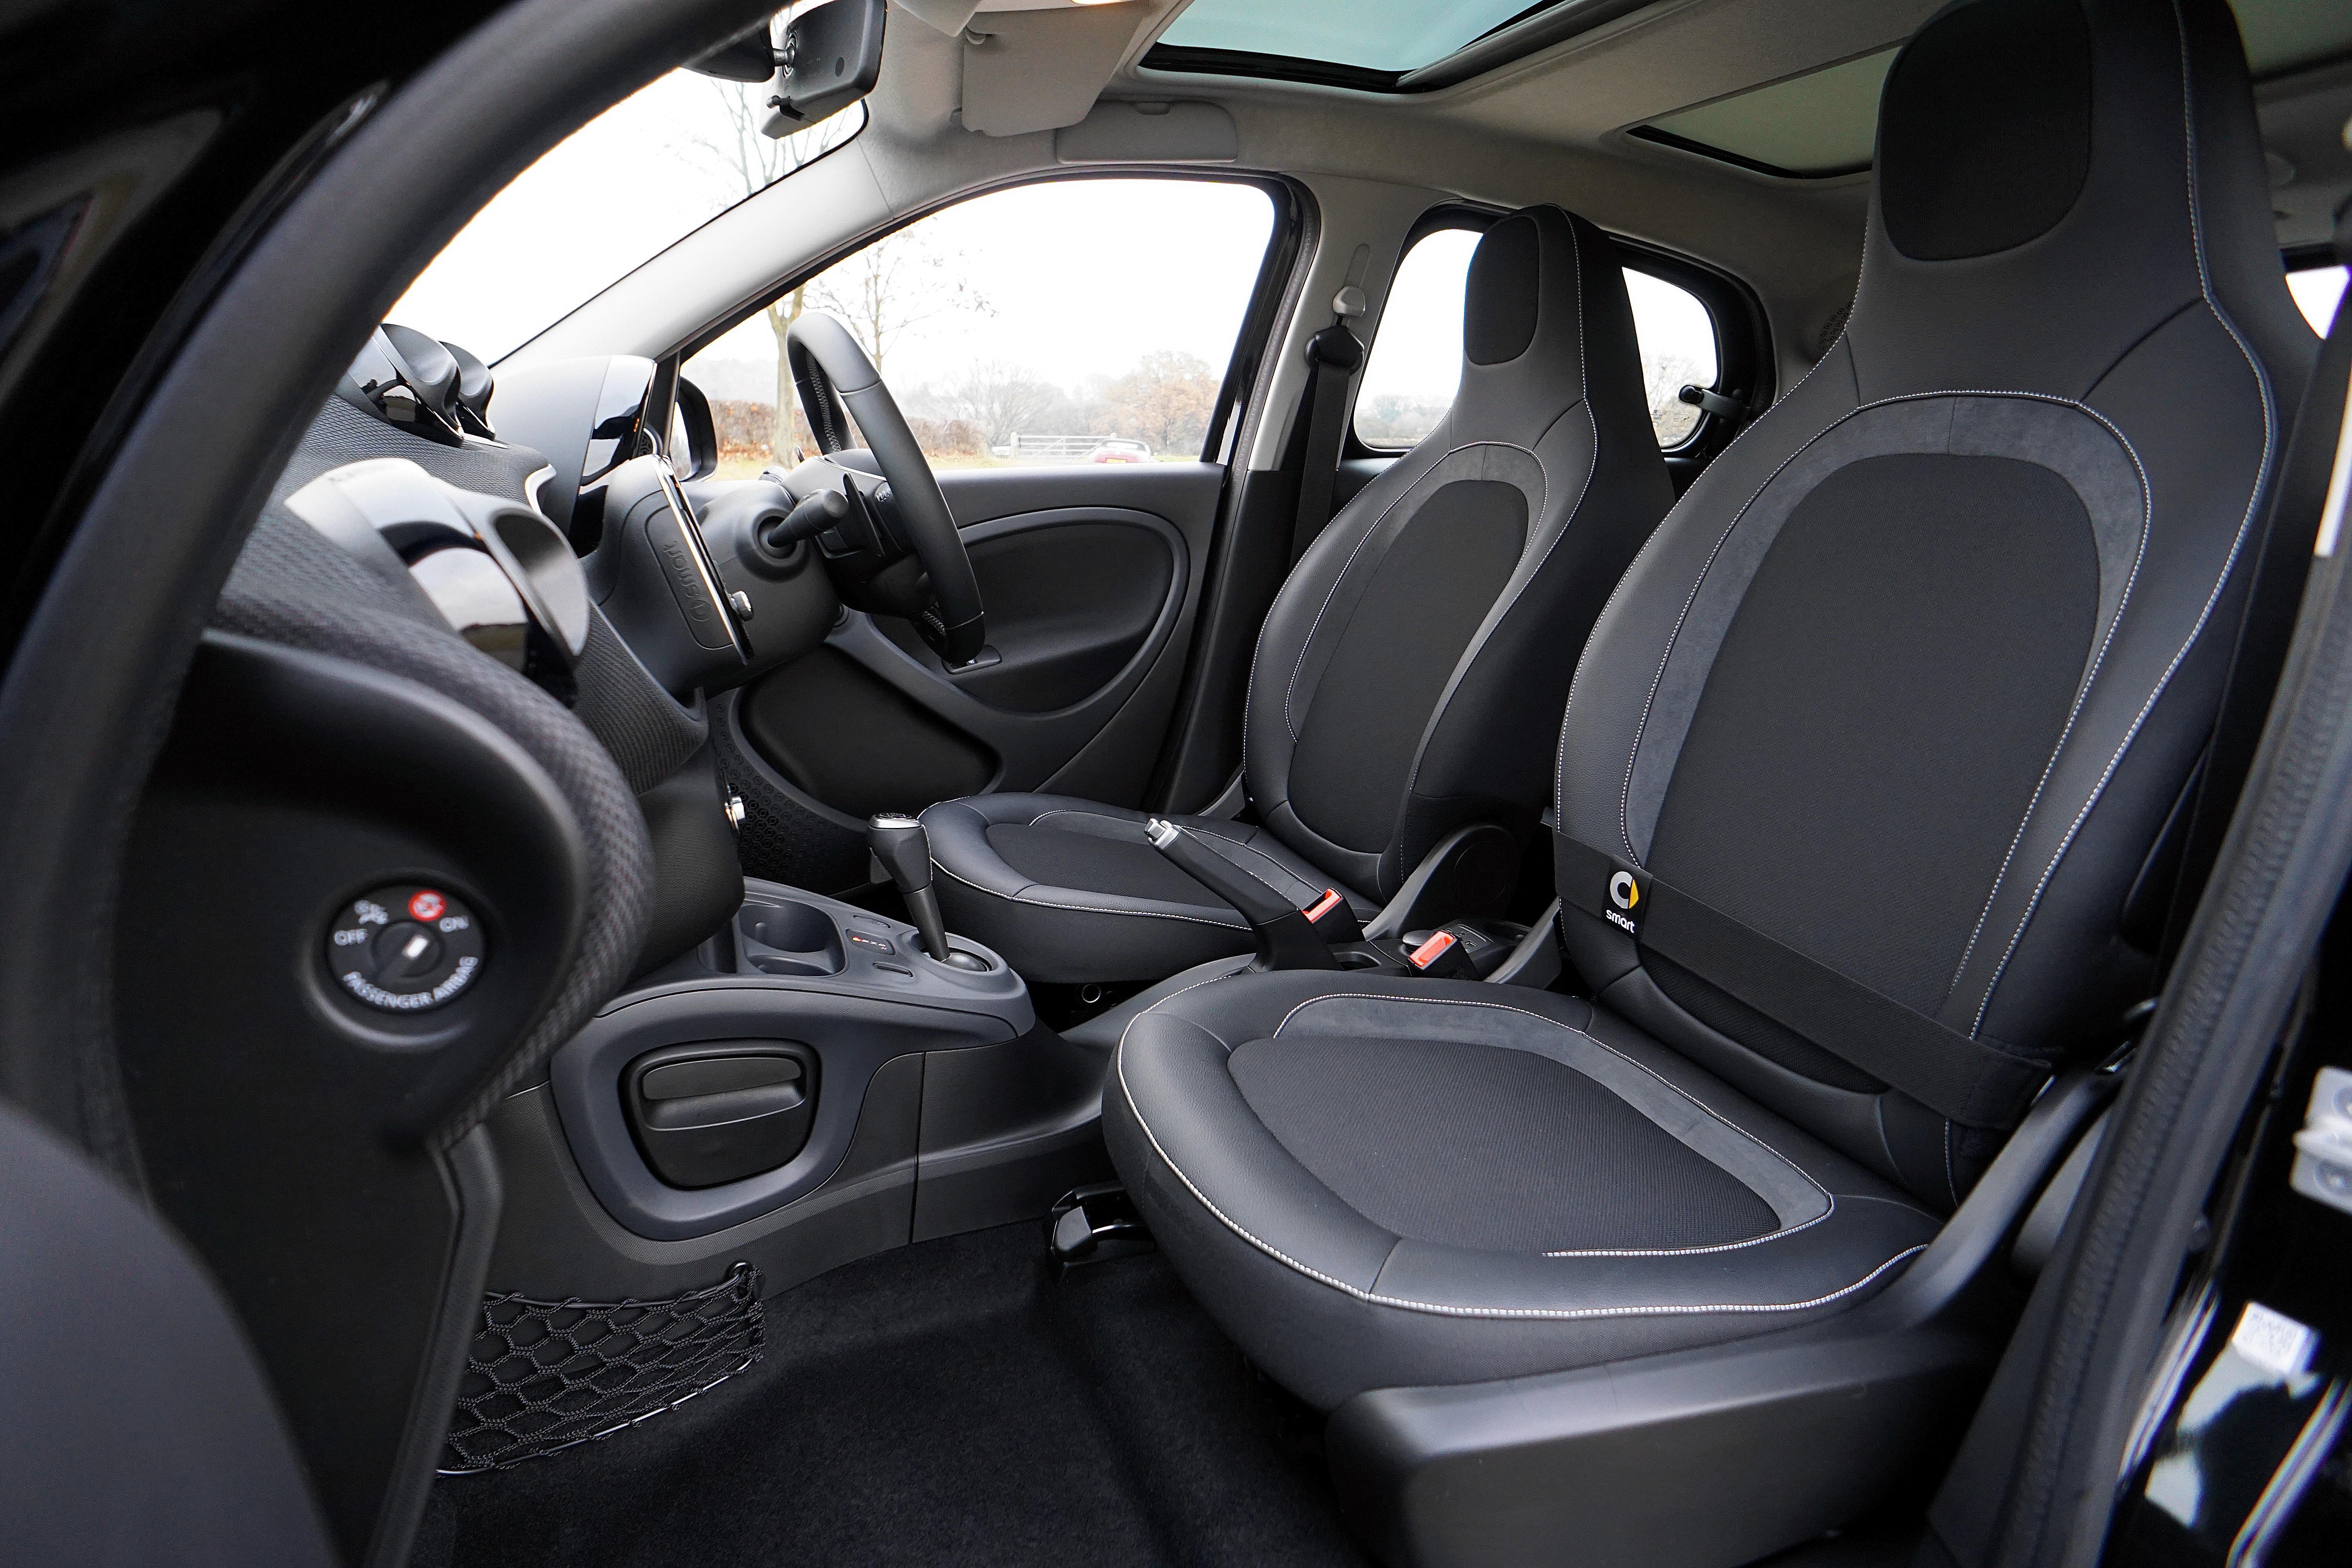 Maintaining Your Investment: The Benefits of Regular Leather Seat Cleaning